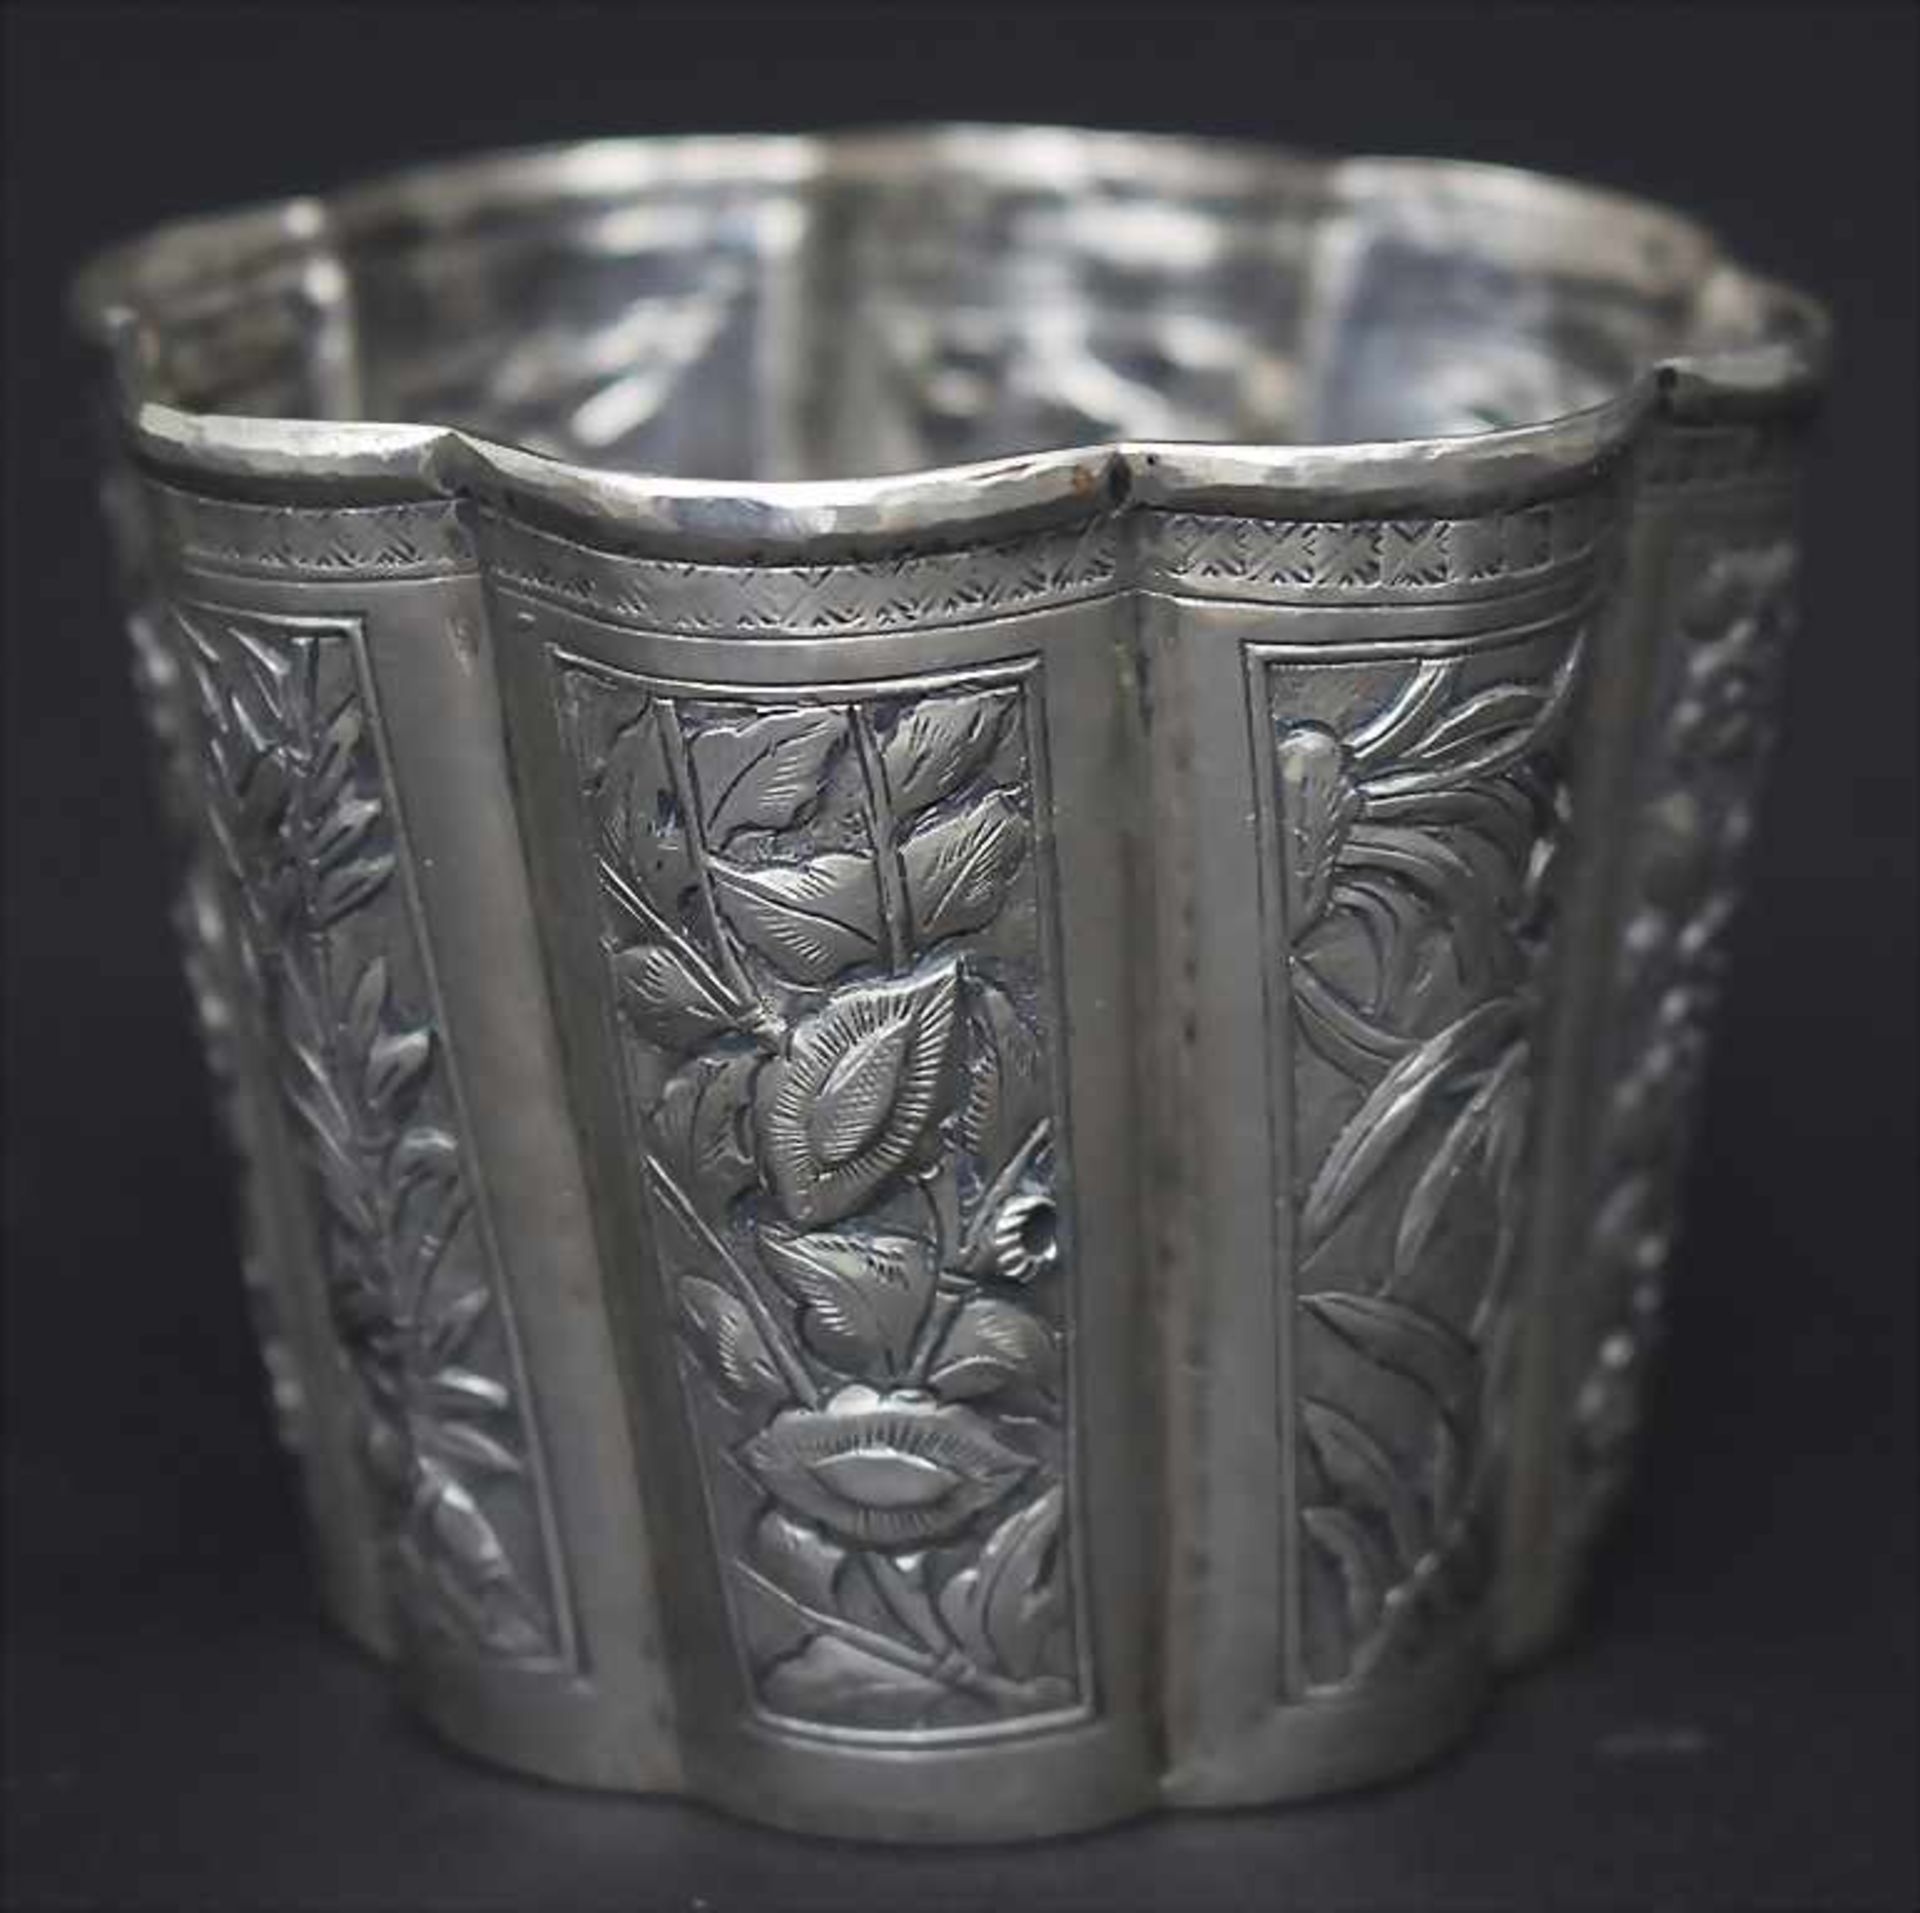 Achtpassiger Becher / A Chinese export silver beaker, wohl Bao Ying, Canton, China, um 1900<